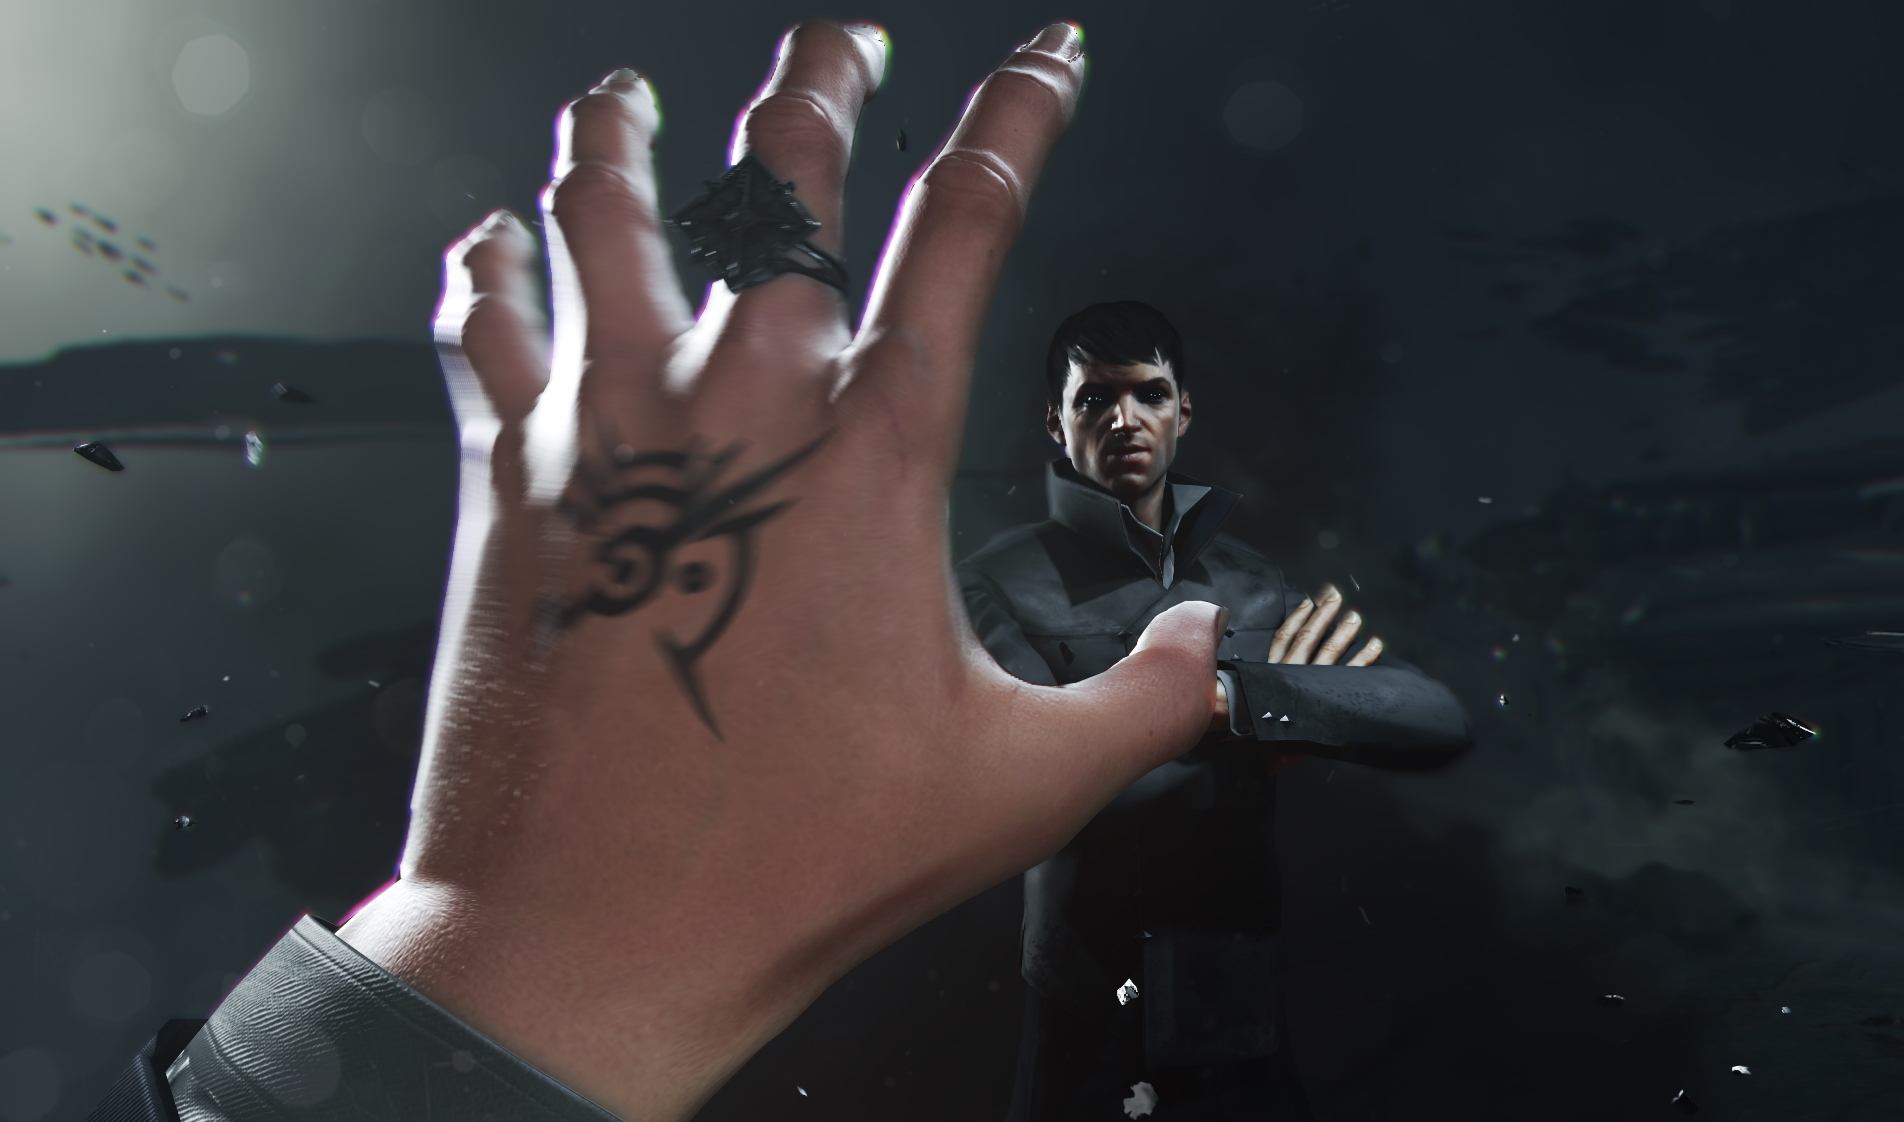 dishonored 2 free pc